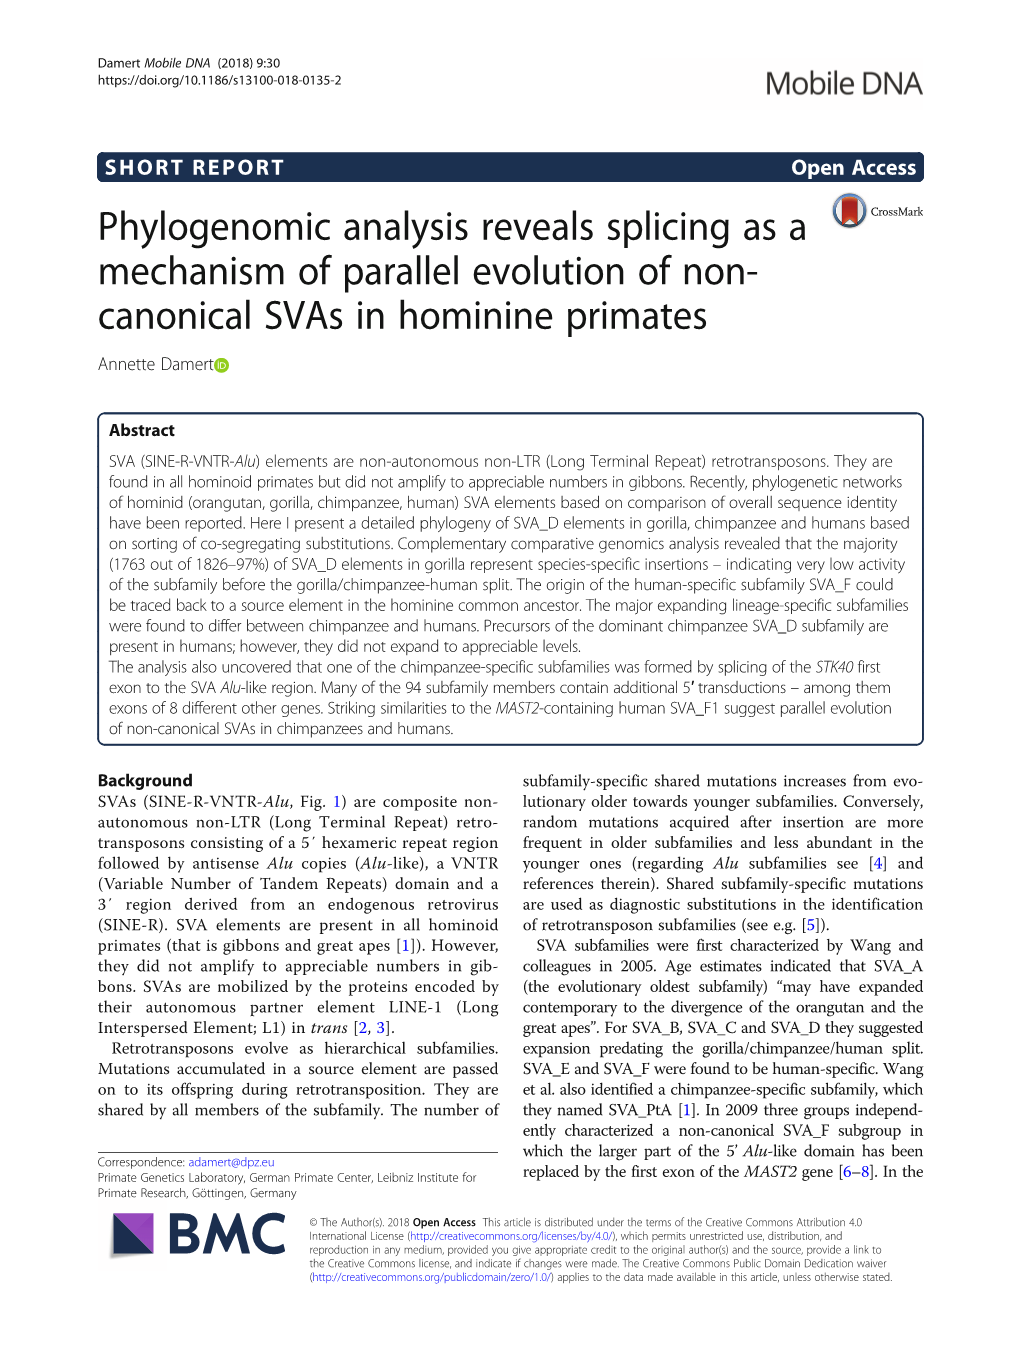 Phylogenomic Analysis Reveals Splicing As a Mechanism of Parallel Evolution of Non- Canonical Svas in Hominine Primates Annette Damert